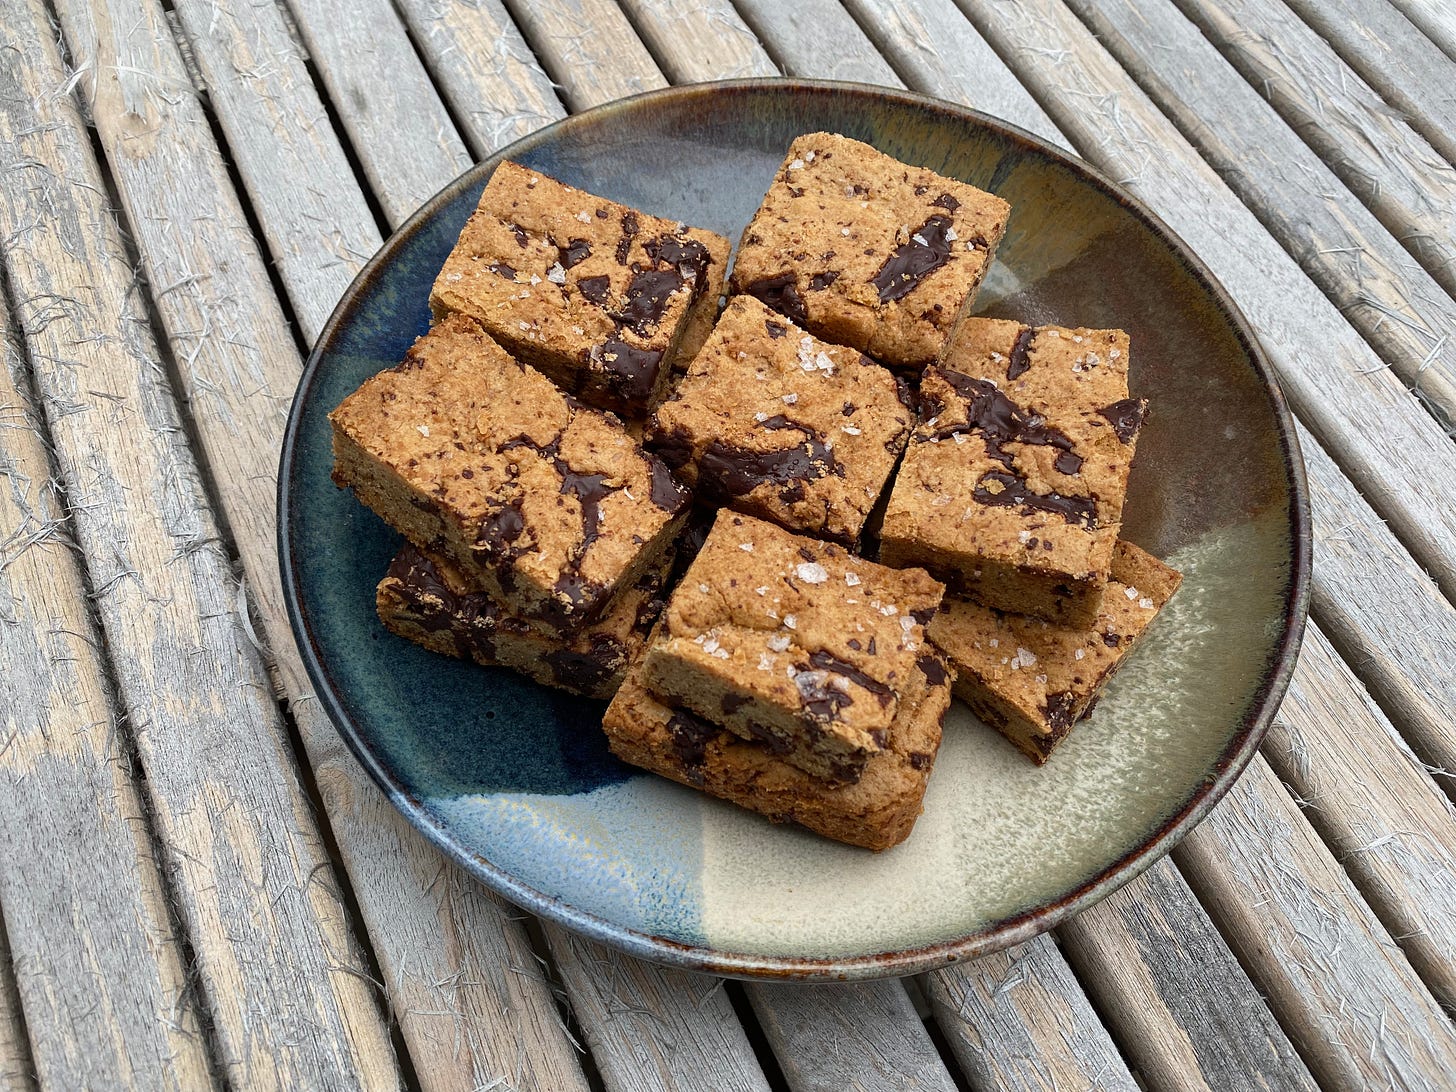 A plate of chocolate tahini bars on a wooden outdoor table.